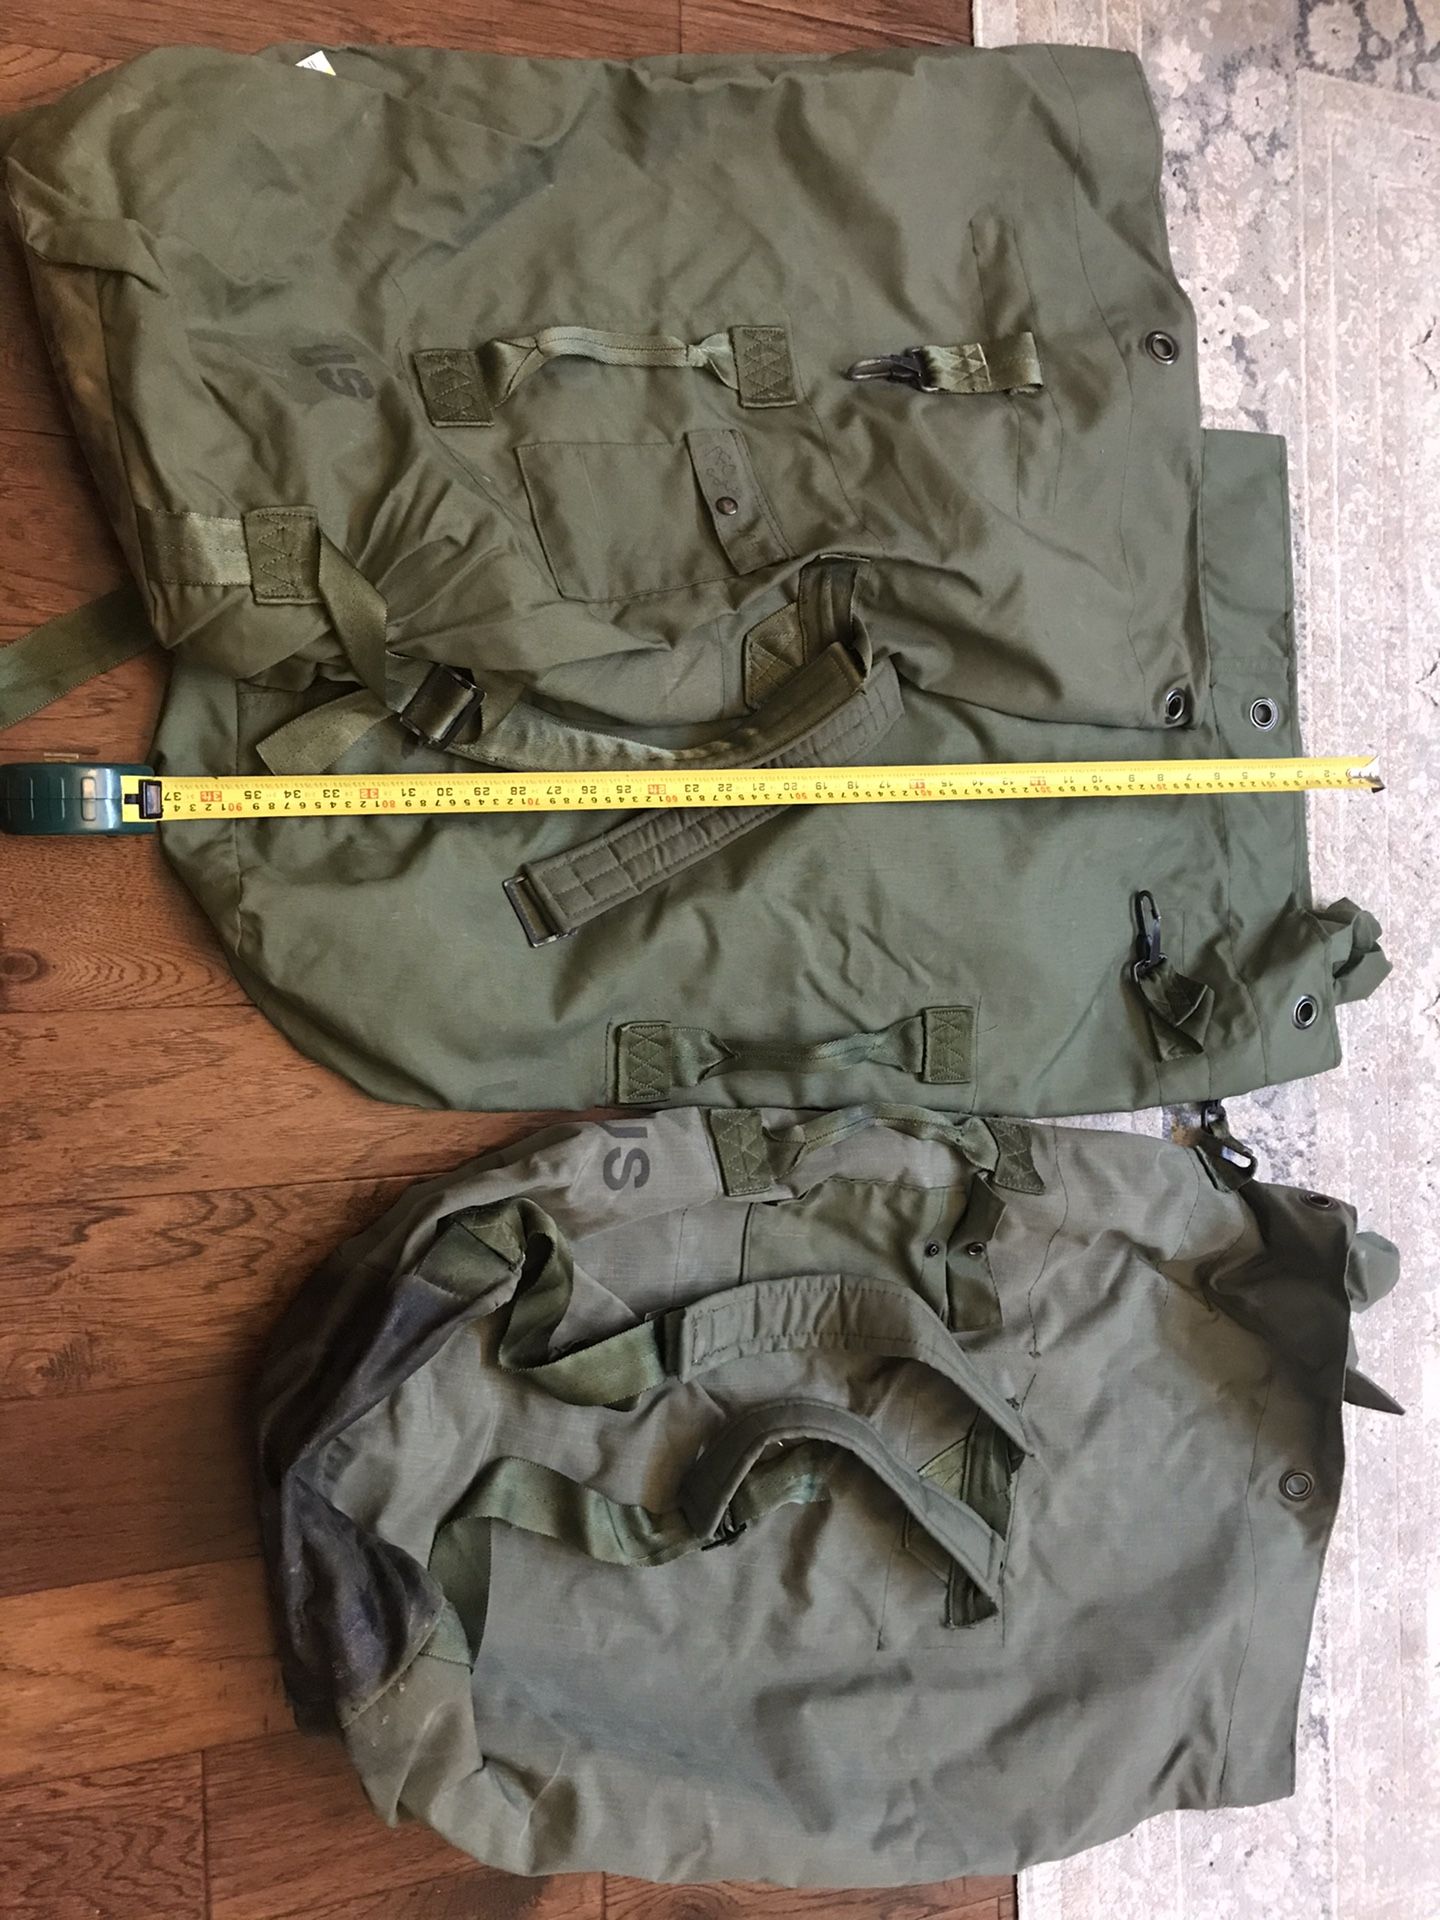 3 Genuine Army Duffles - price for ALL